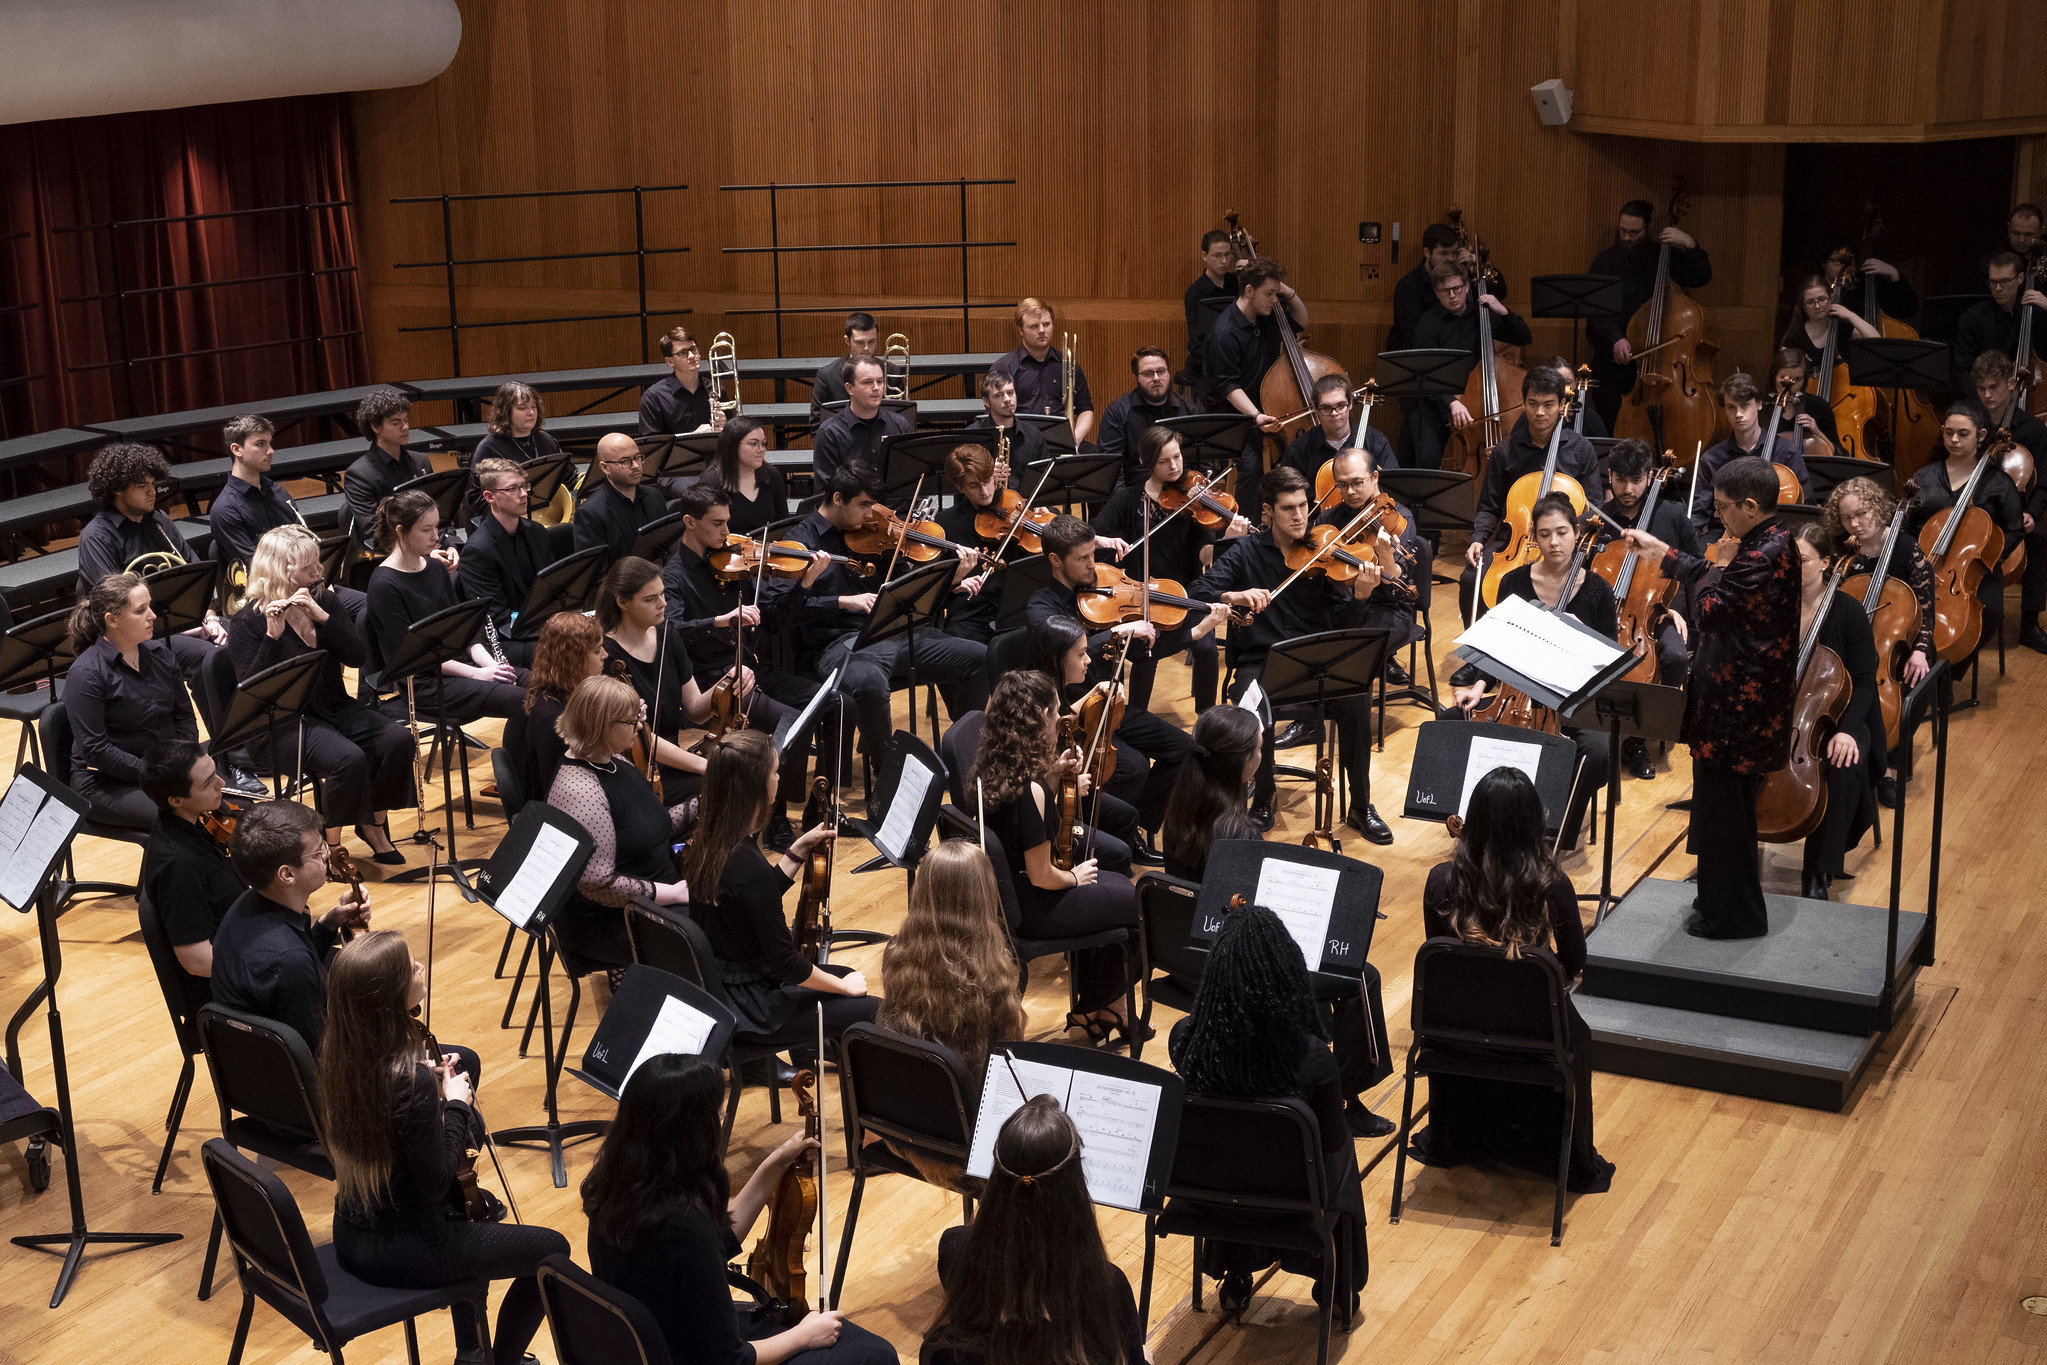 UofL Orchestra performing in Comstock Hall